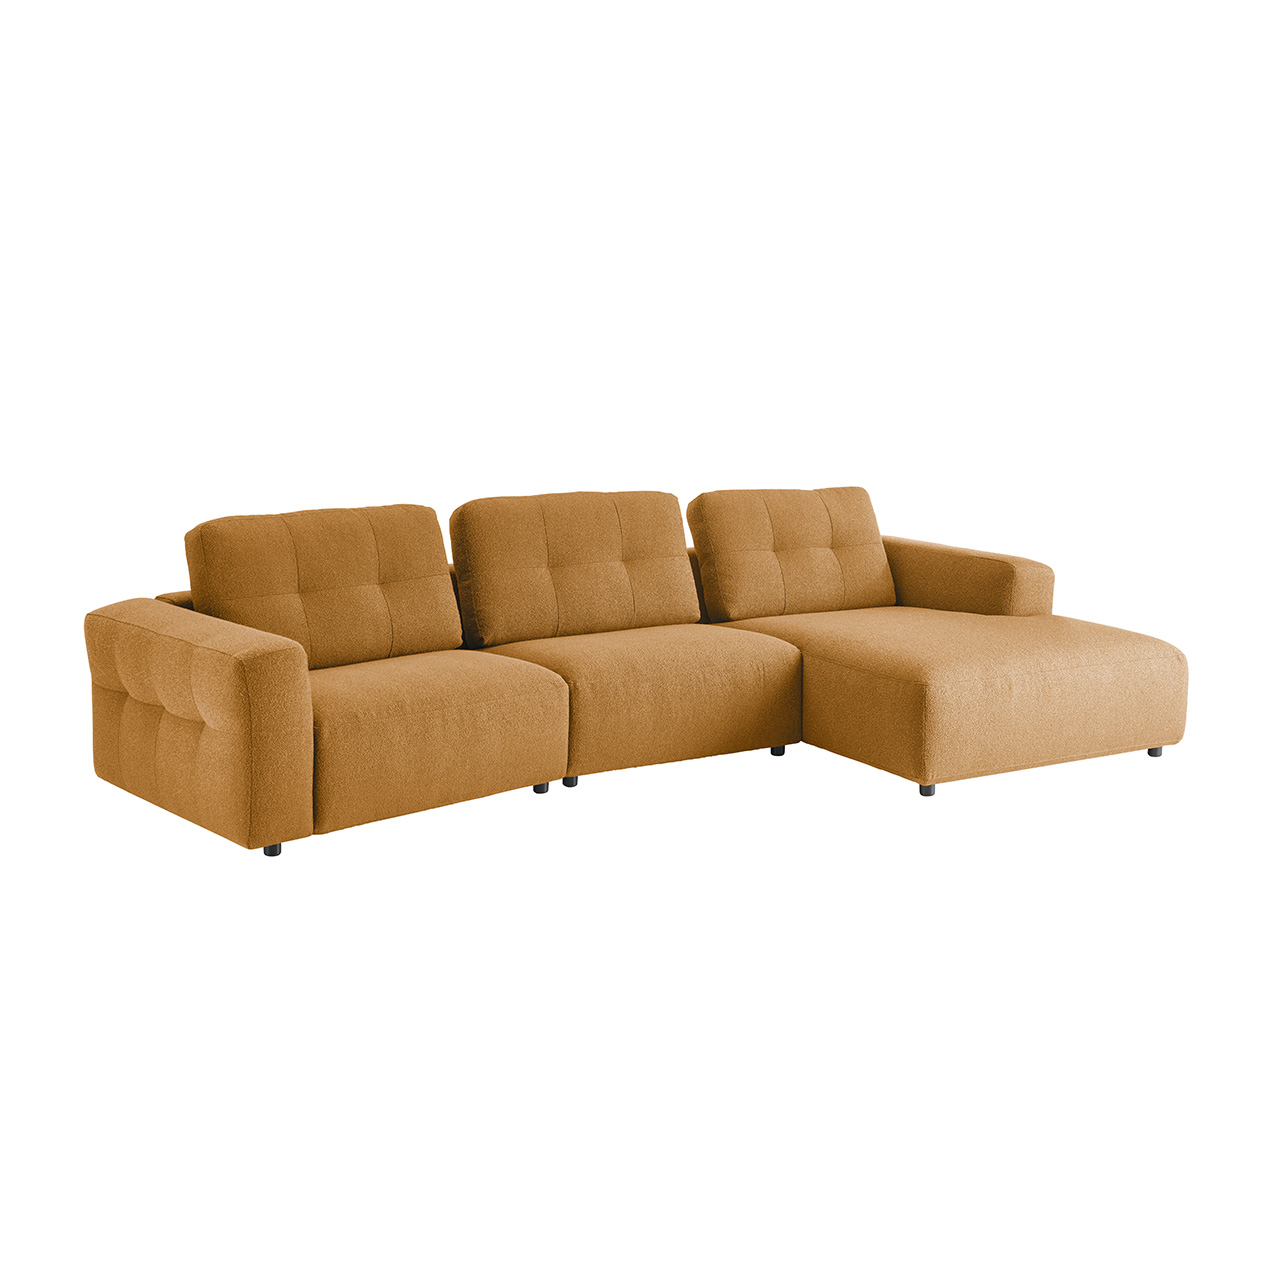 3C Farbe: Modell: Upper Candy East Sofa Weiß links Longchair Cord - |